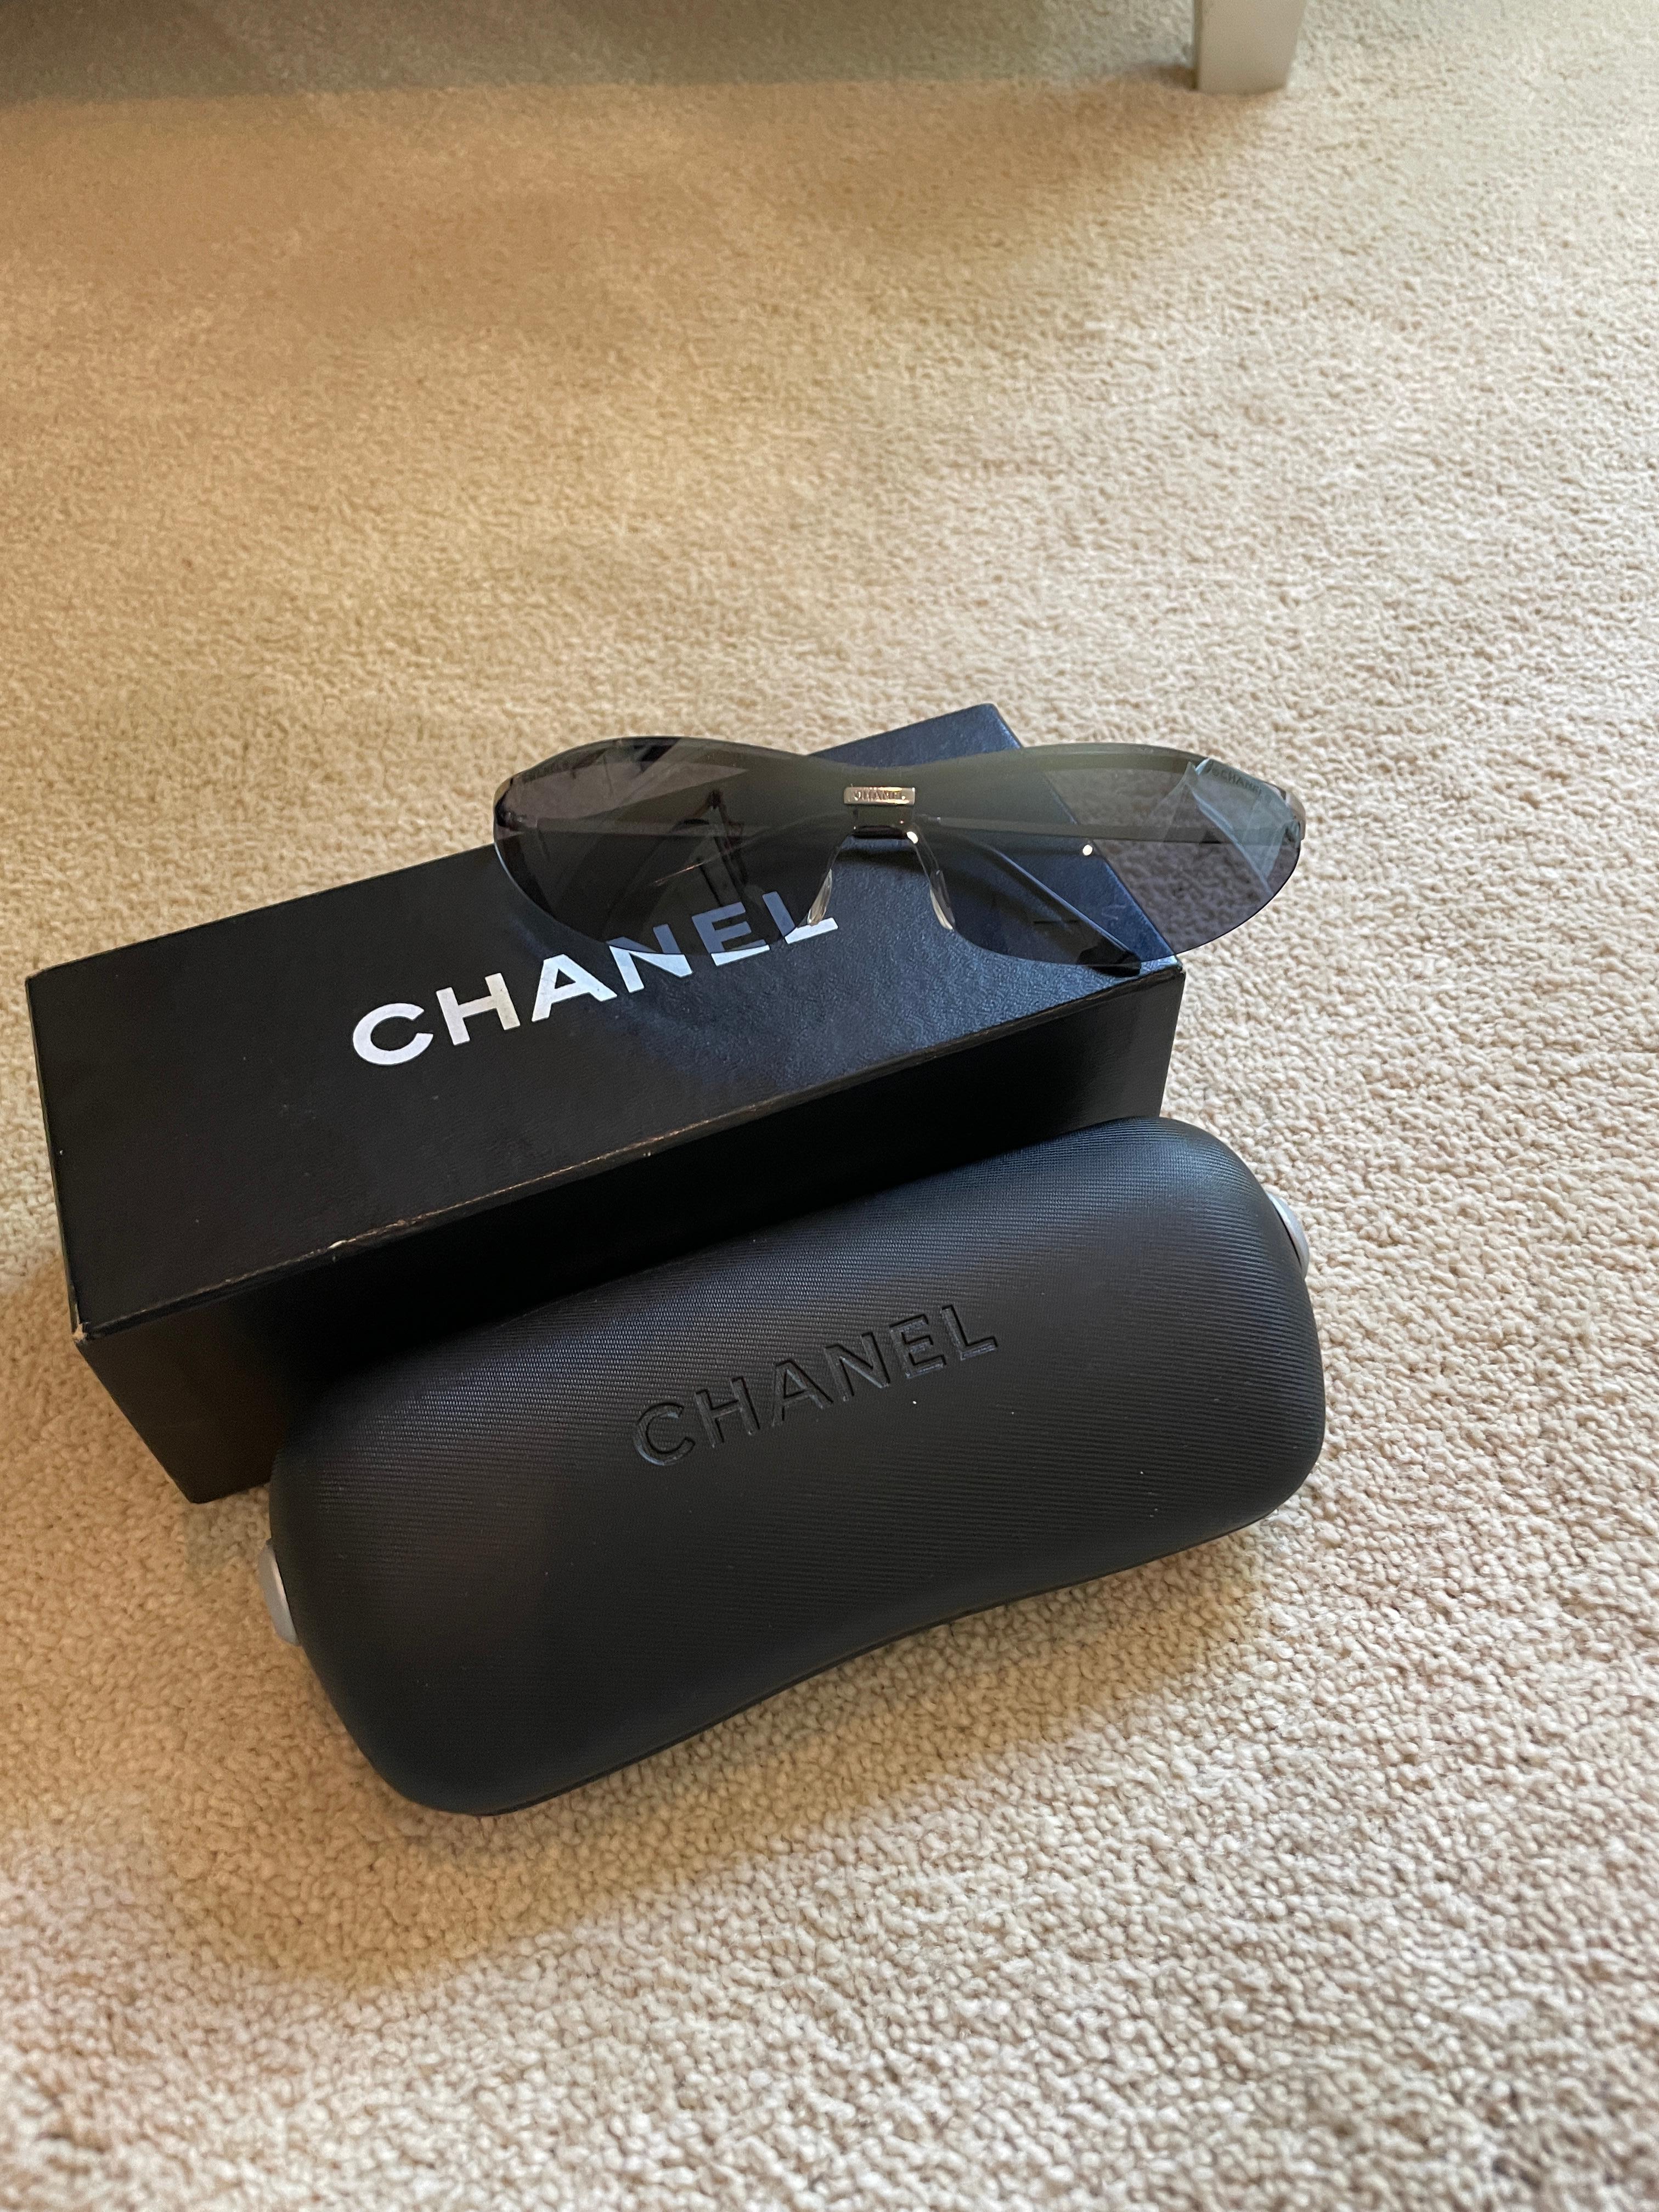 Gray lenses with silver frames, rimless, new in box no flaws Chanel skinny sleek sunglasses!